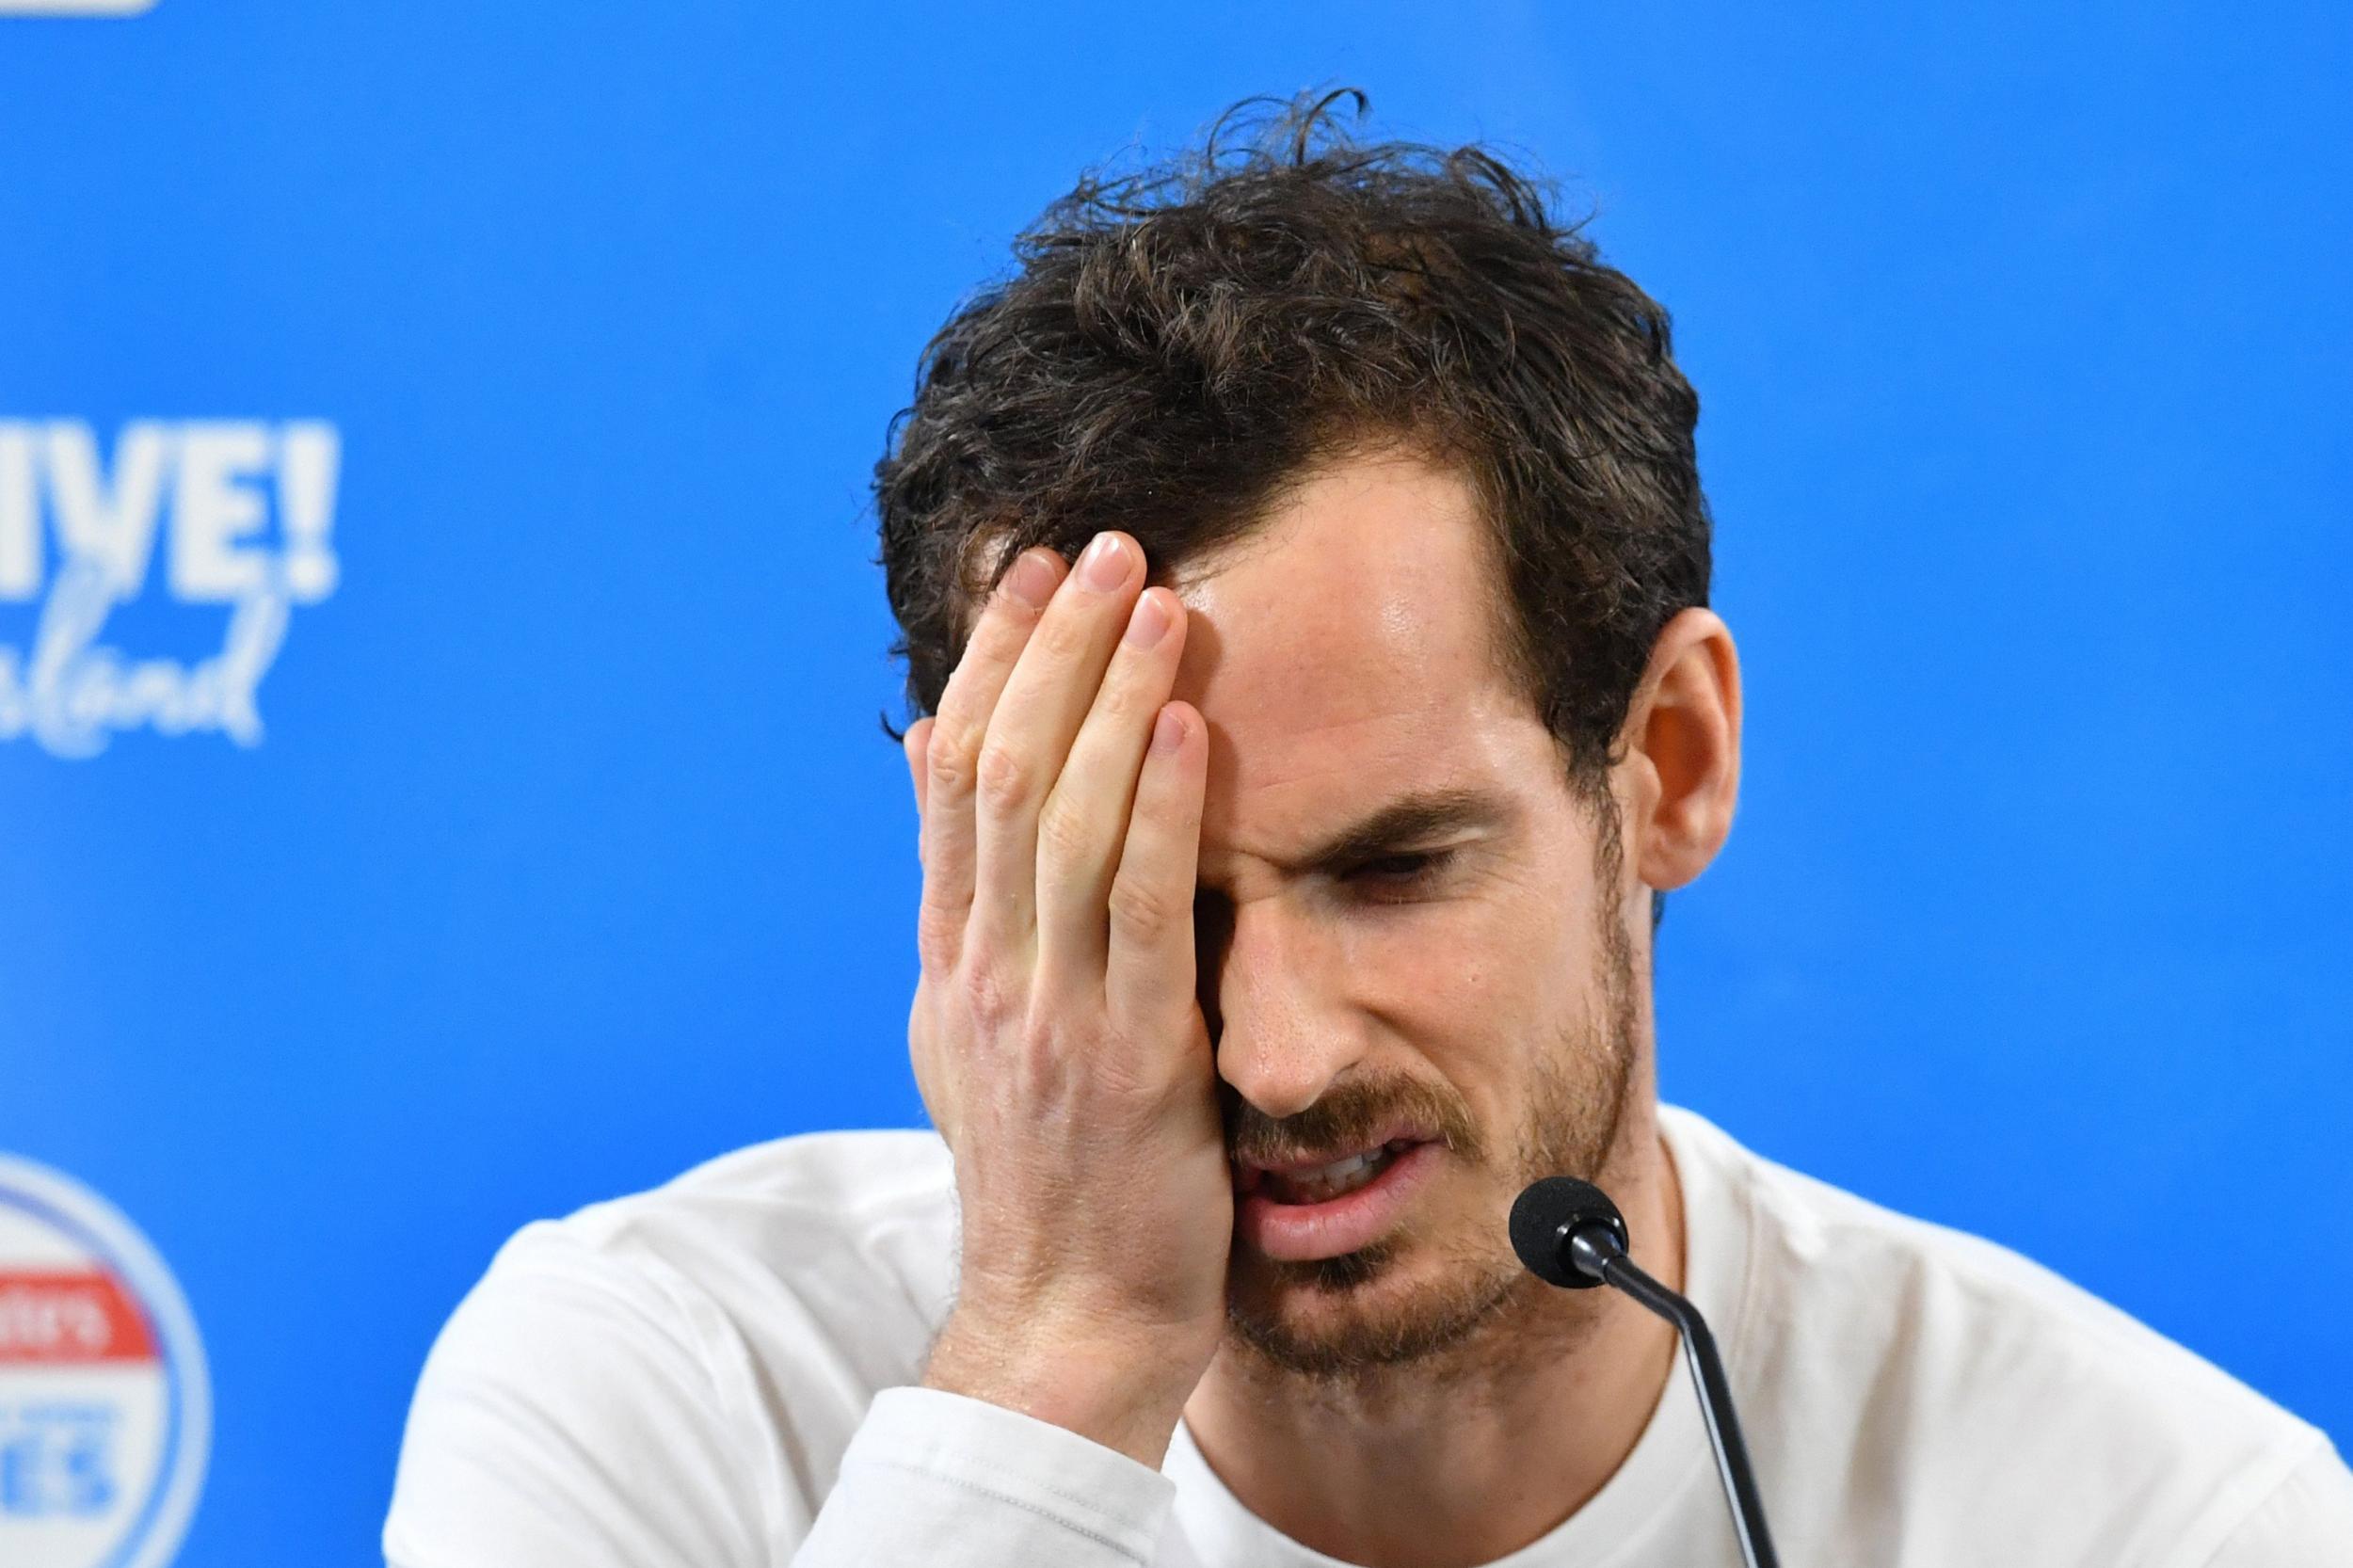 This might not be the end for Andy Murray, but the road back is long